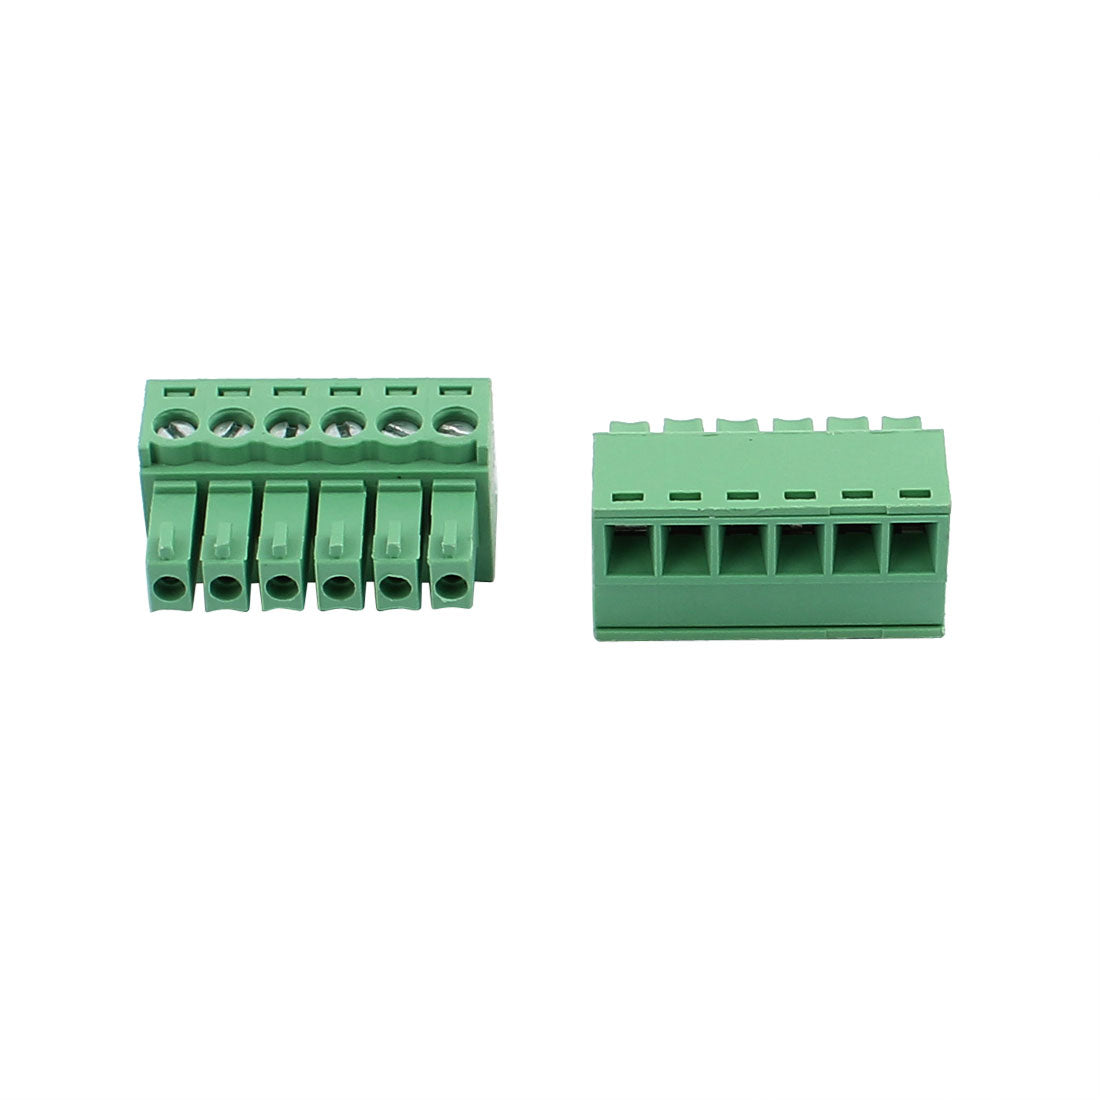 uxcell Uxcell 10Pcs 300V KF2EDGK 3.5mm Pitch 6-Pin PCB Screw Terminal Block Connector